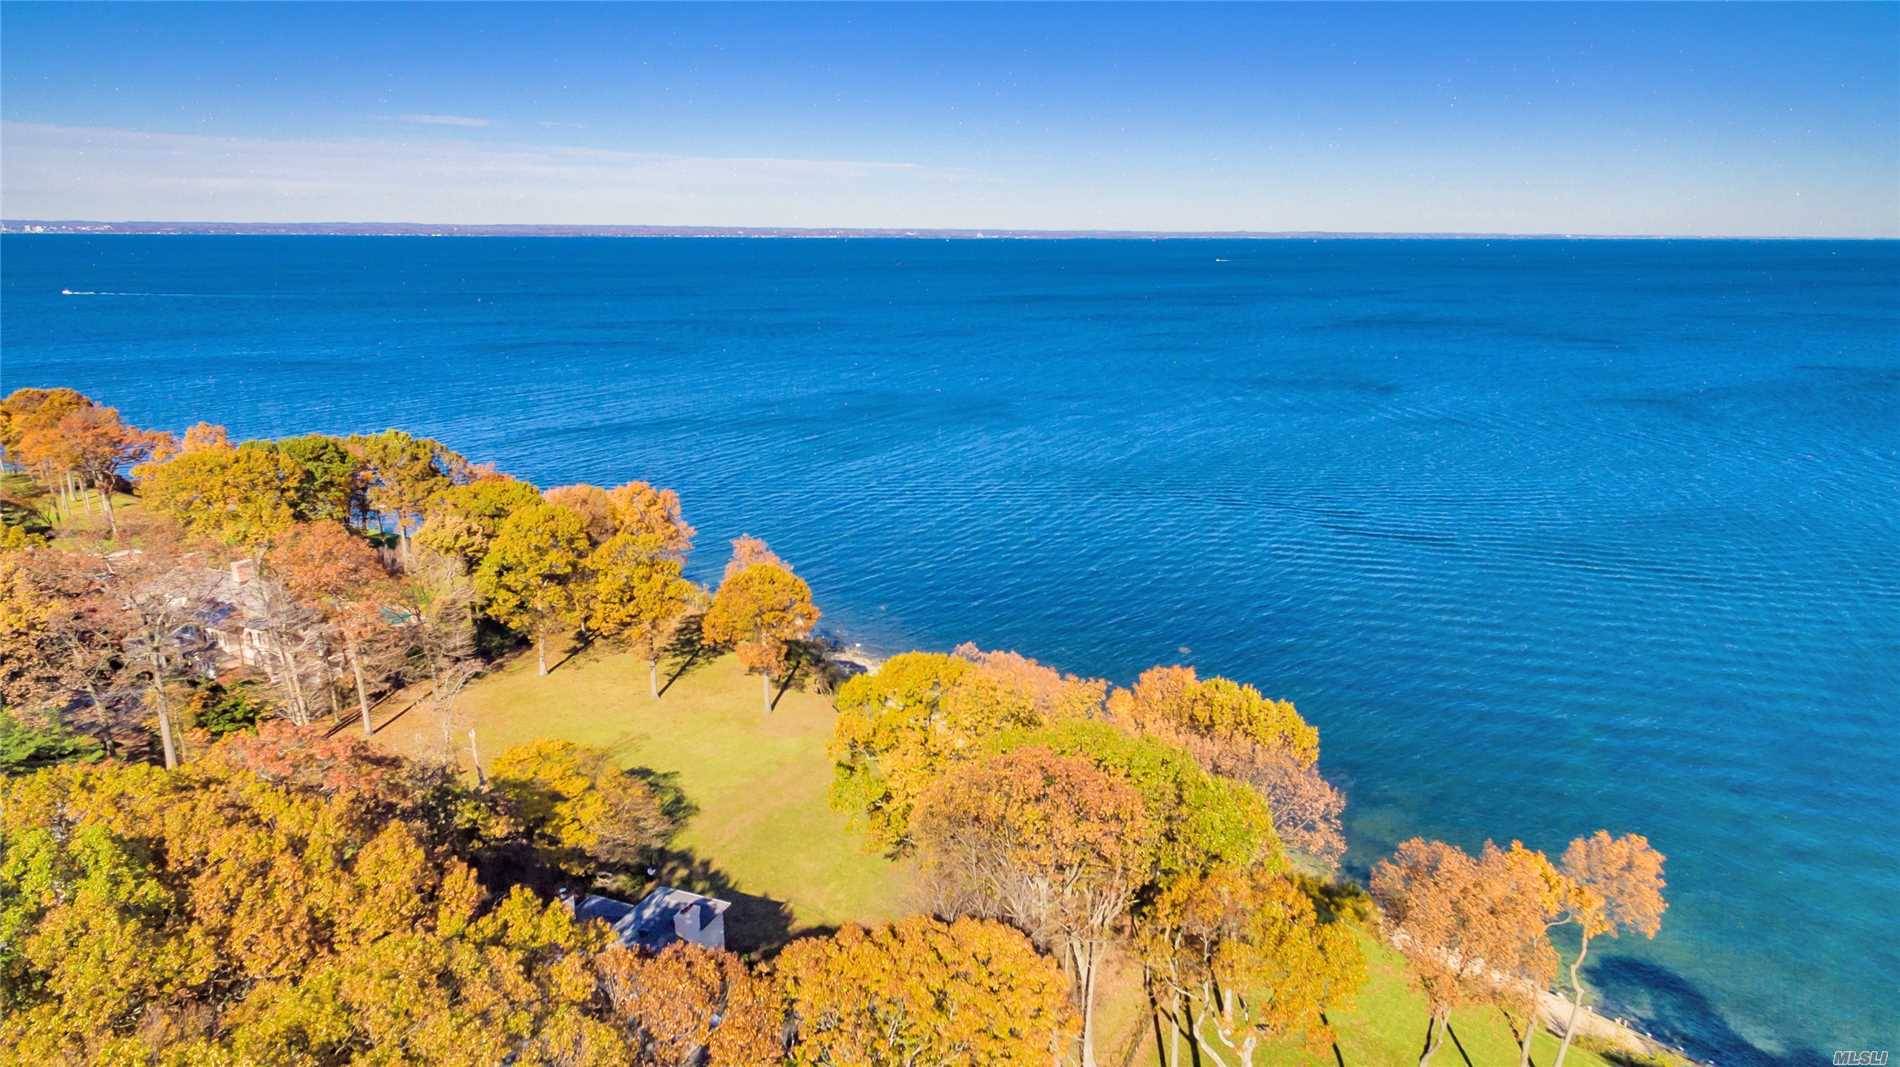 Waterfront Home Nestled On 2 Acres With 180 Degree Captivating WaterViews Of The Long Island Sound.